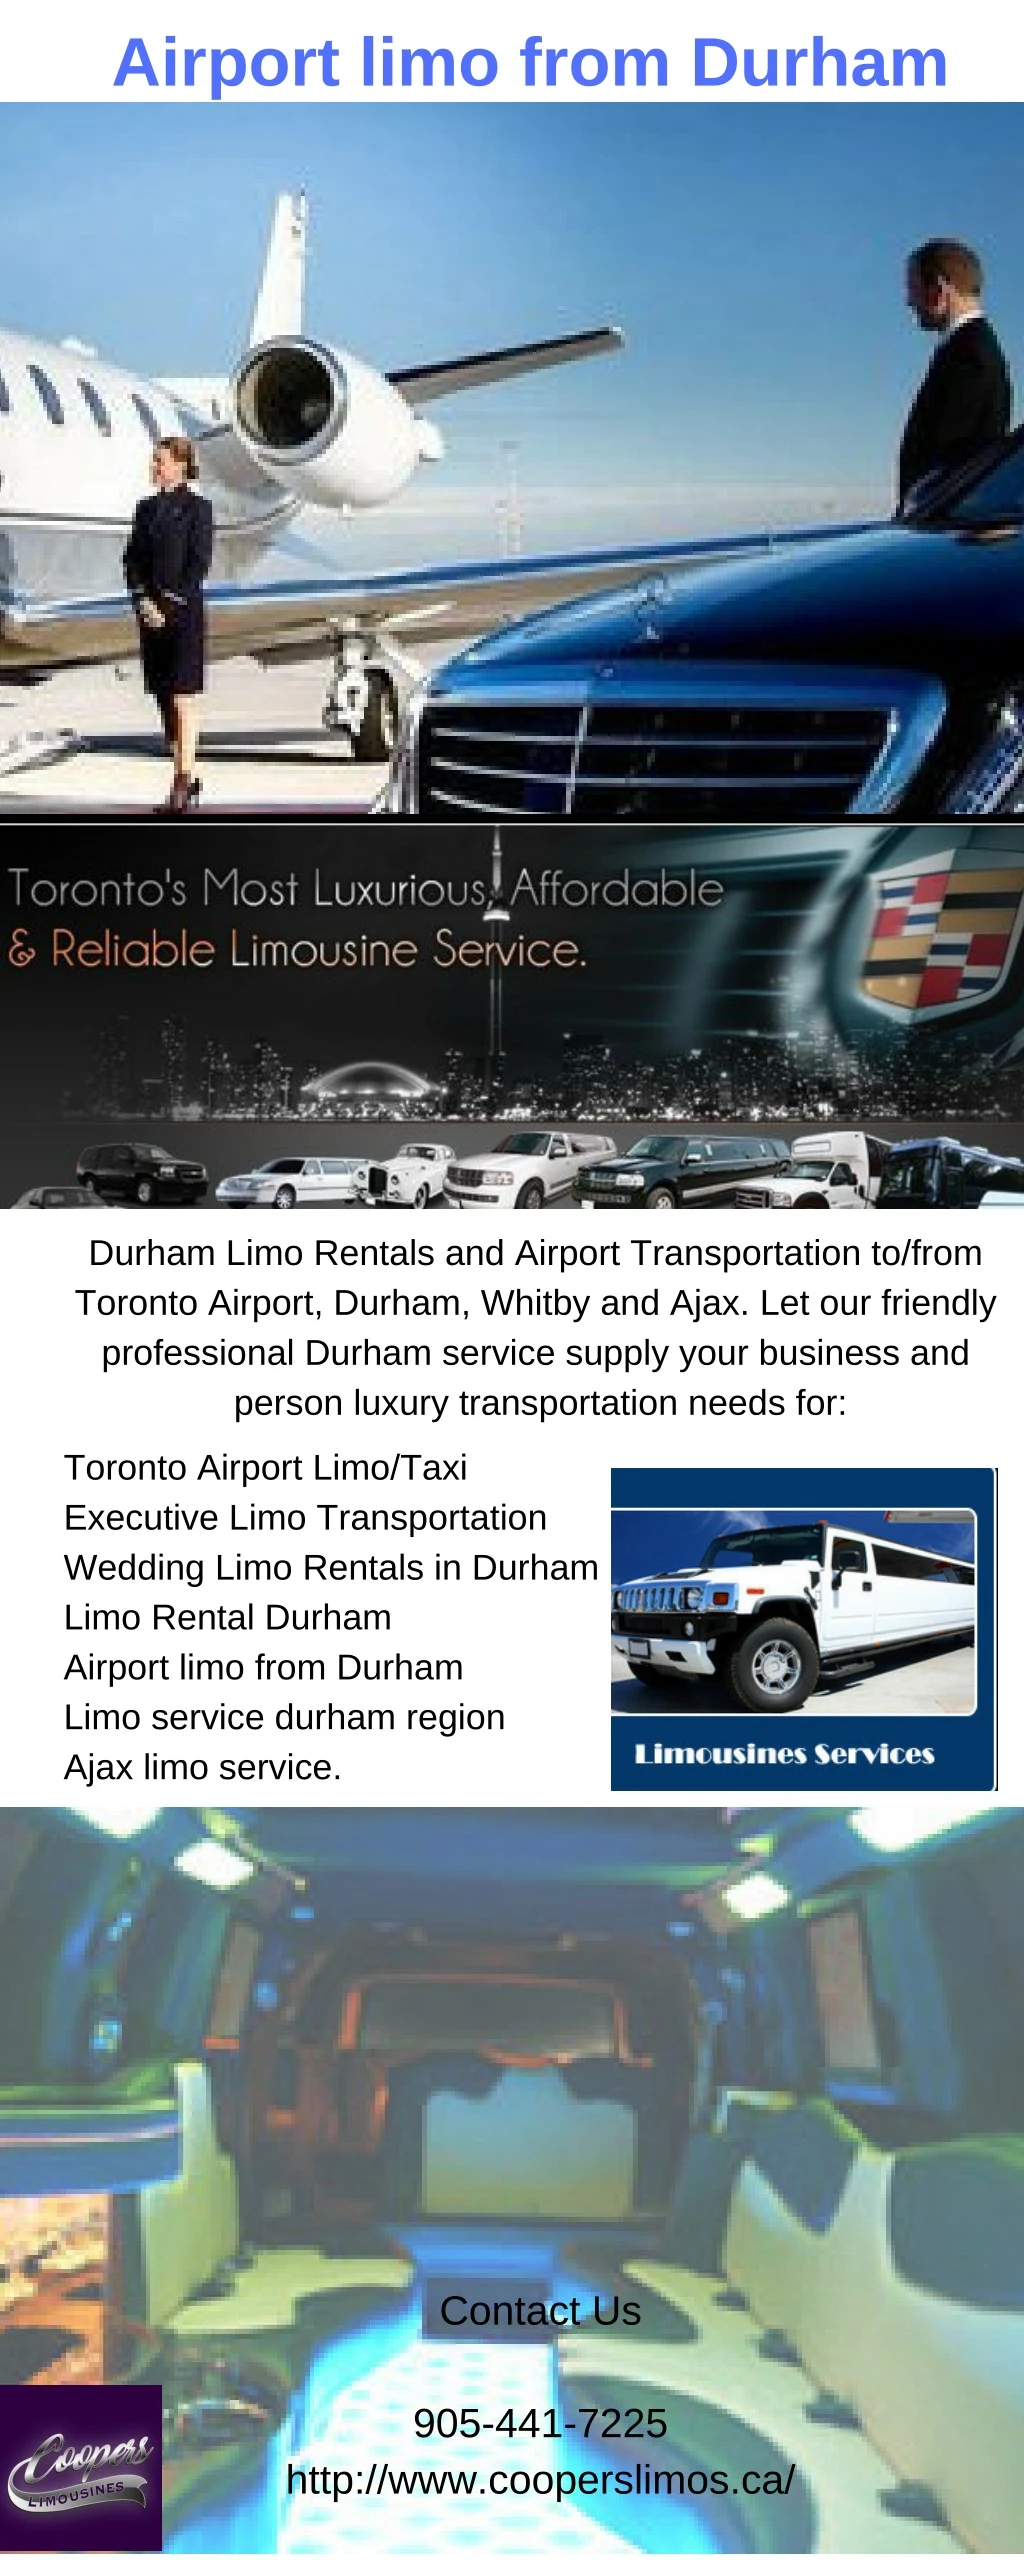 airport limo from durham